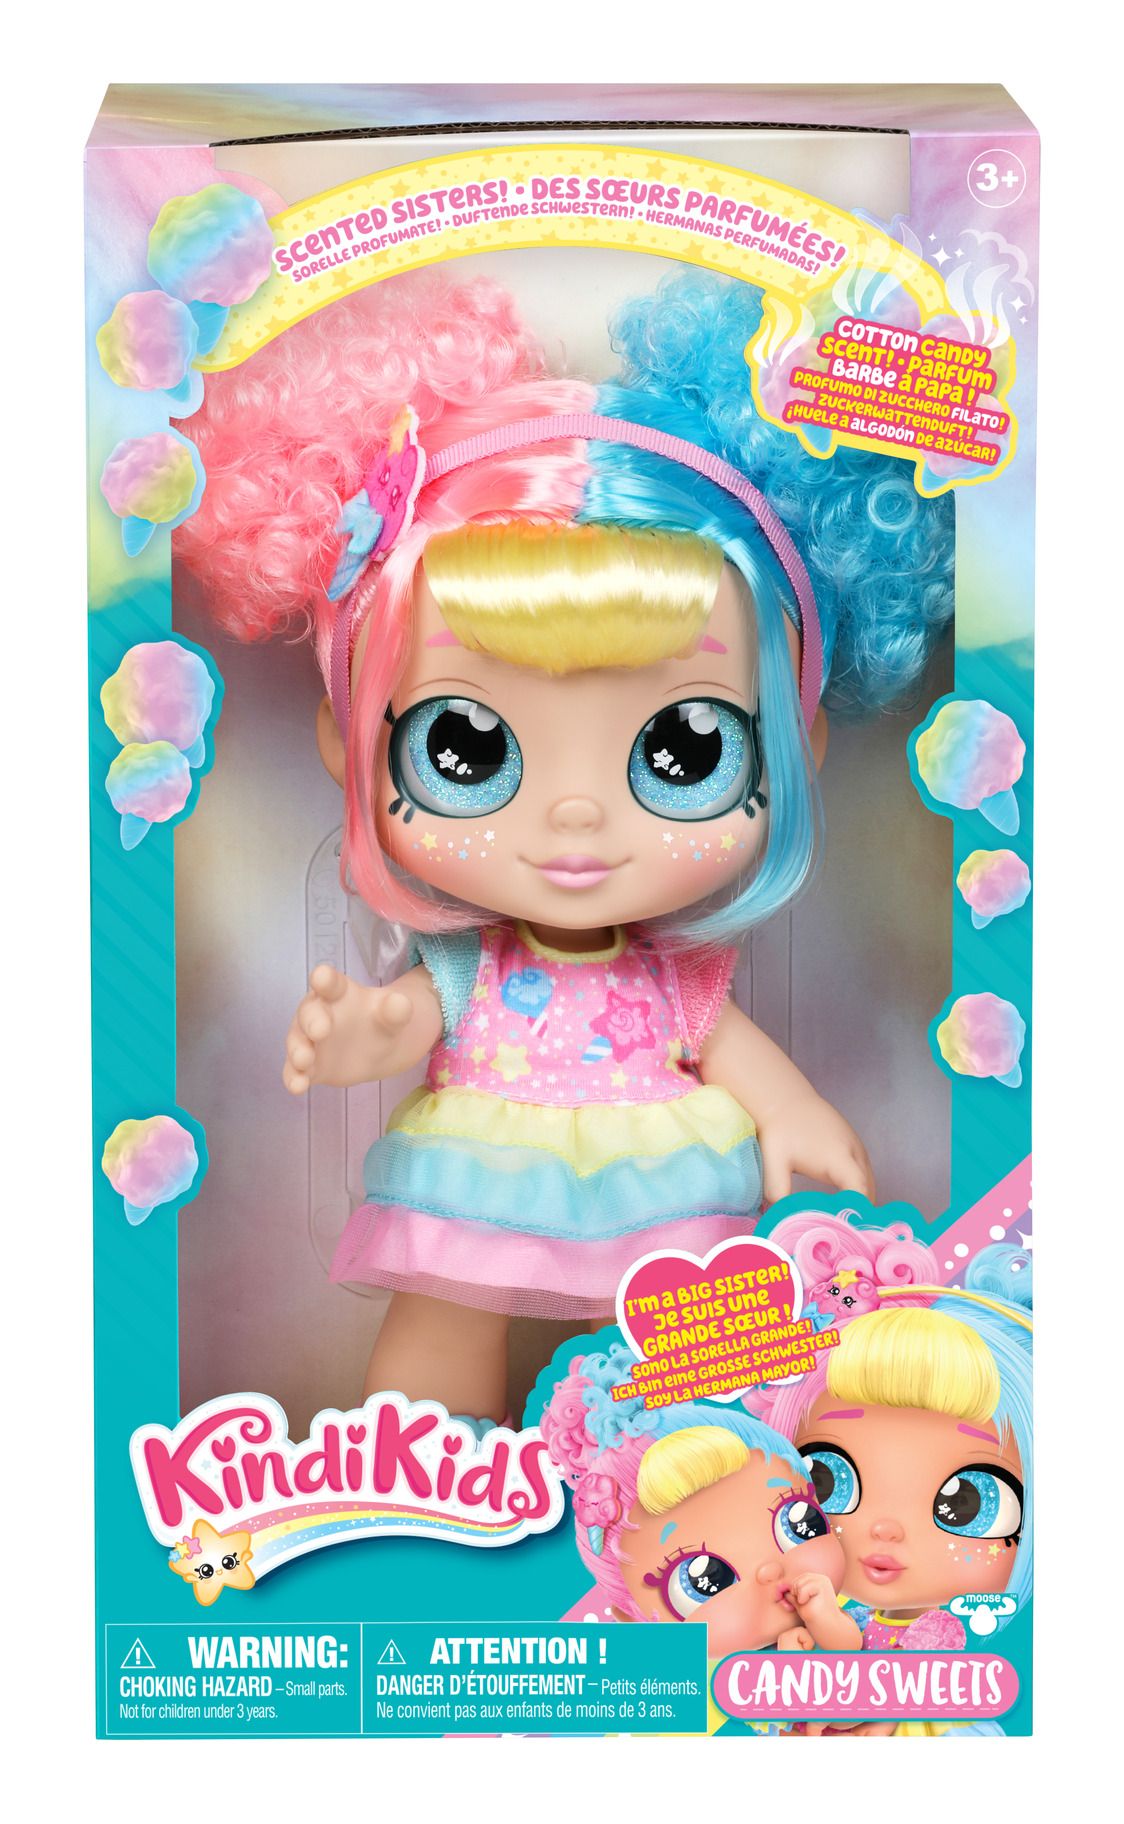 An image of Kindi Kids Series 6 Scented Big Sister Candy Sweets